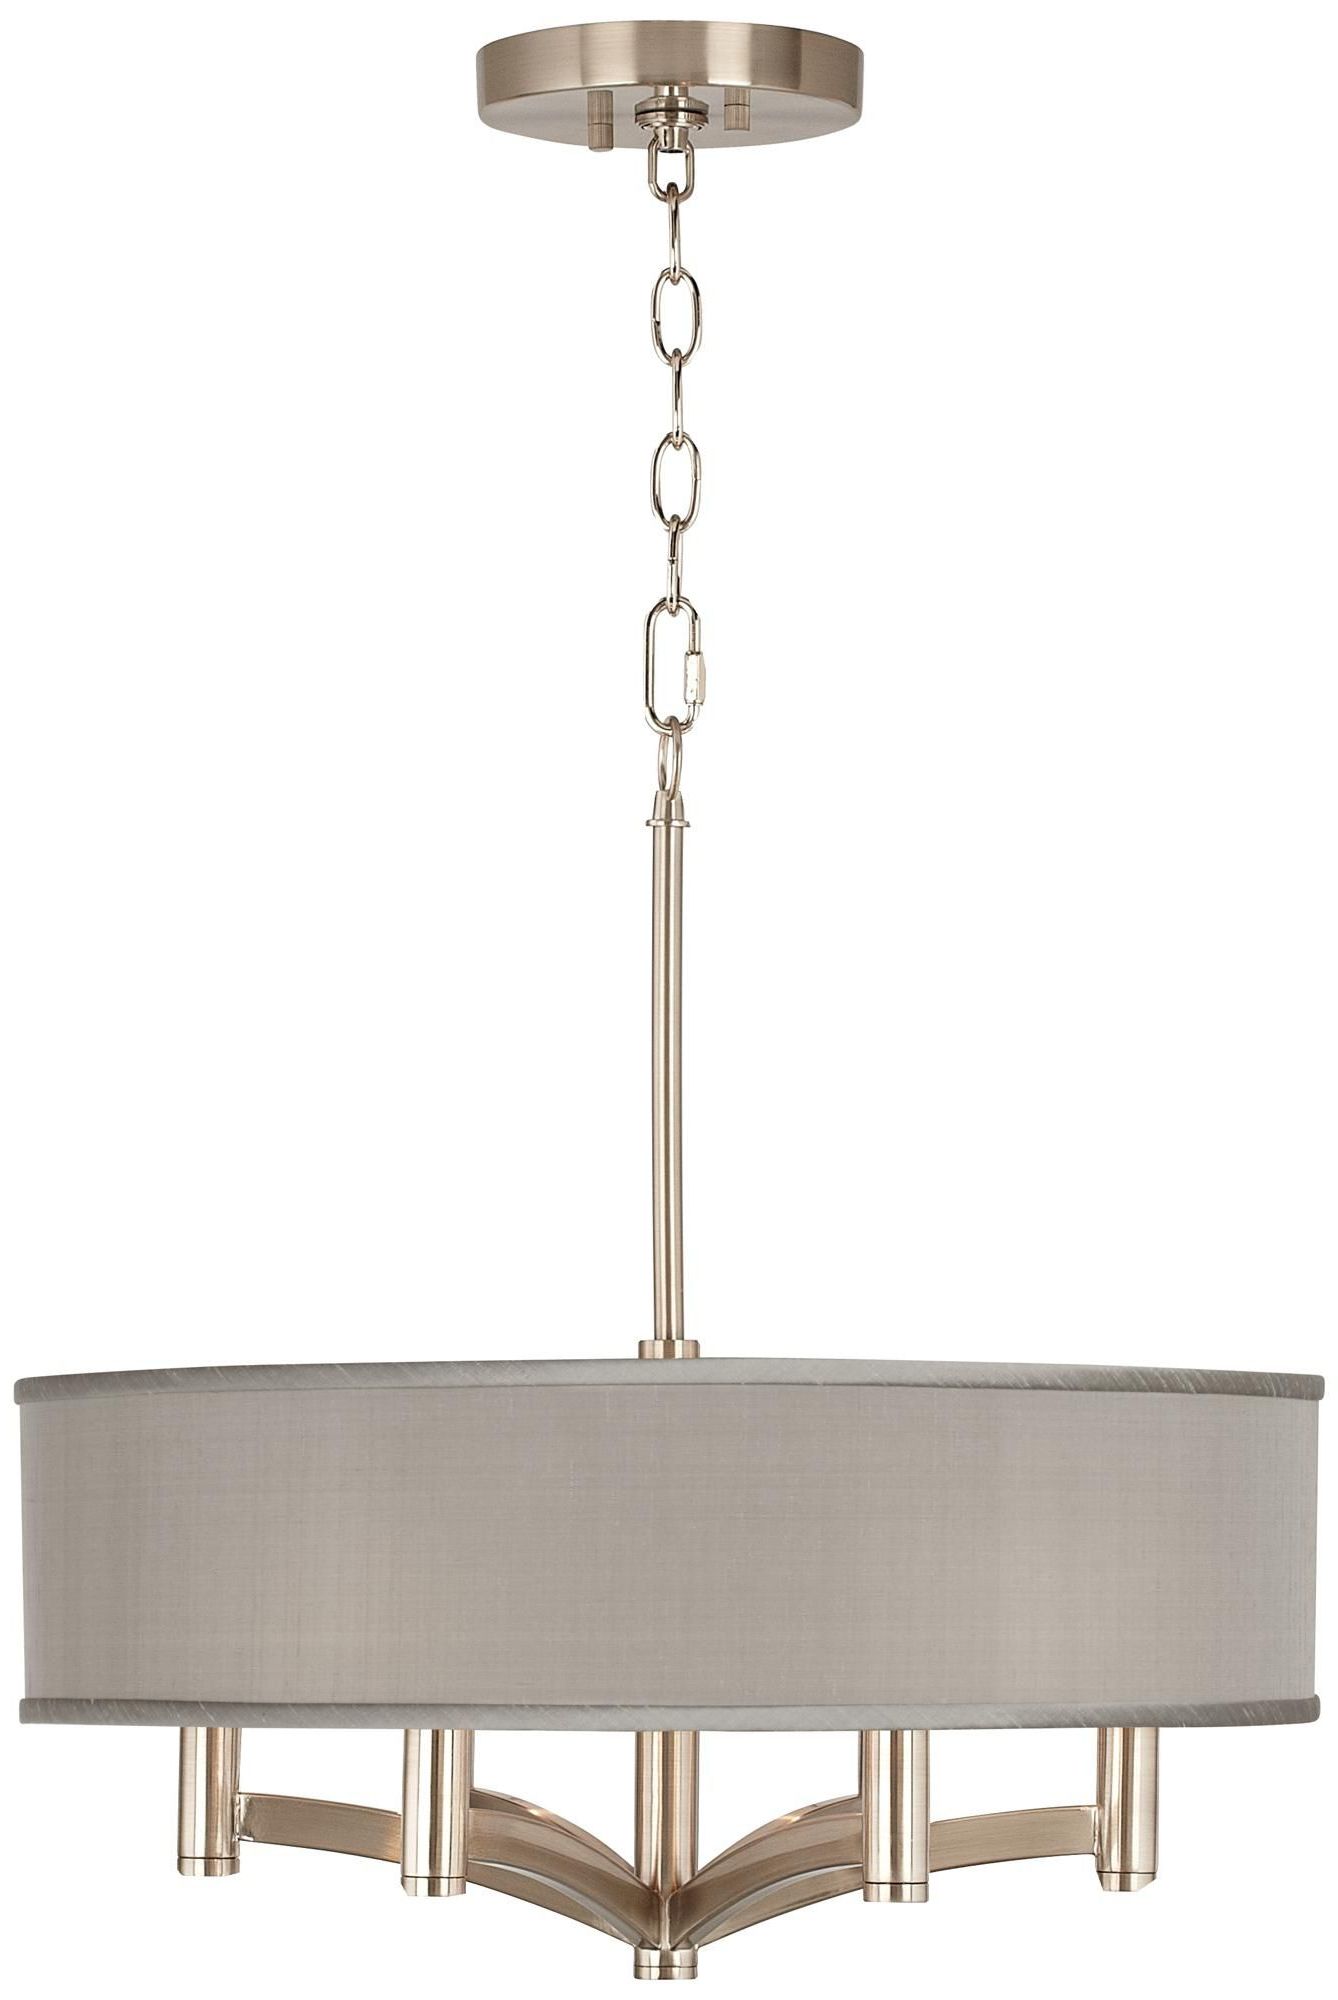 Newest Stone Grey With Brushed Nickel Six Light Chandeliers With Regard To Gray Faux Silk Ava 6 Light Nickel Pendant Chandelier (View 17 of 20)